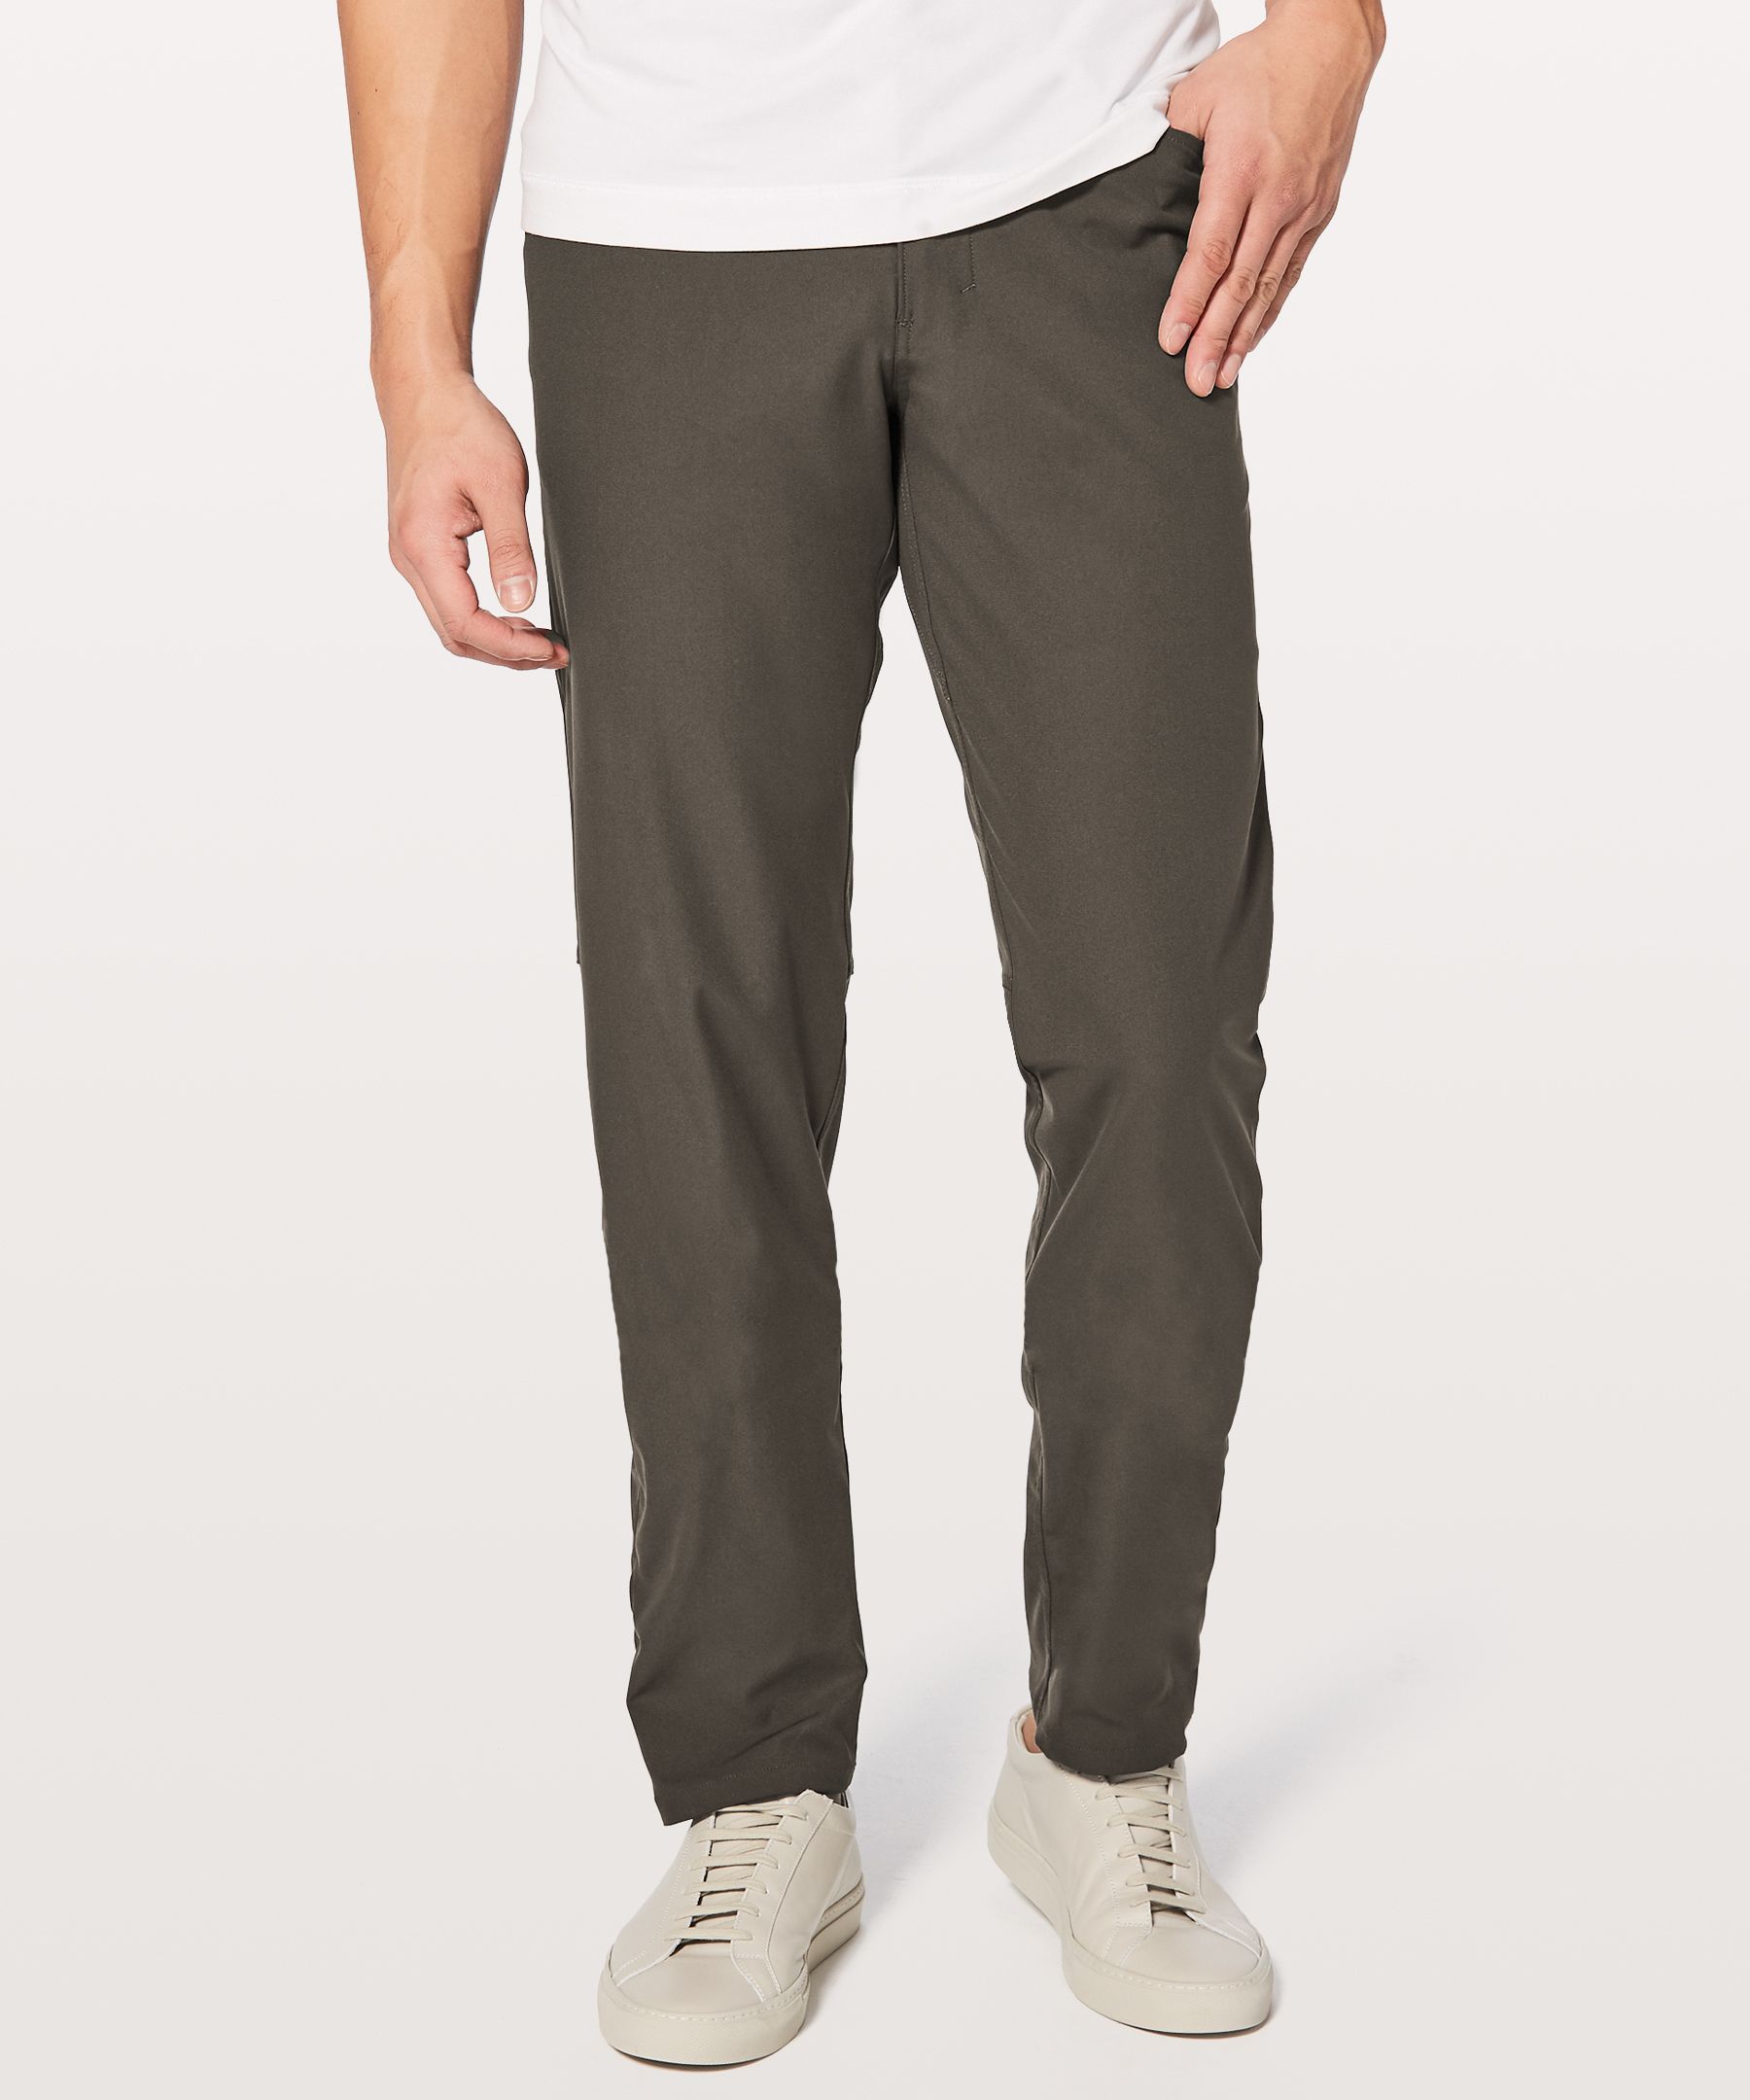 Lululemon Abc Pants Equivalent To Men's  International Society of  Precision Agriculture